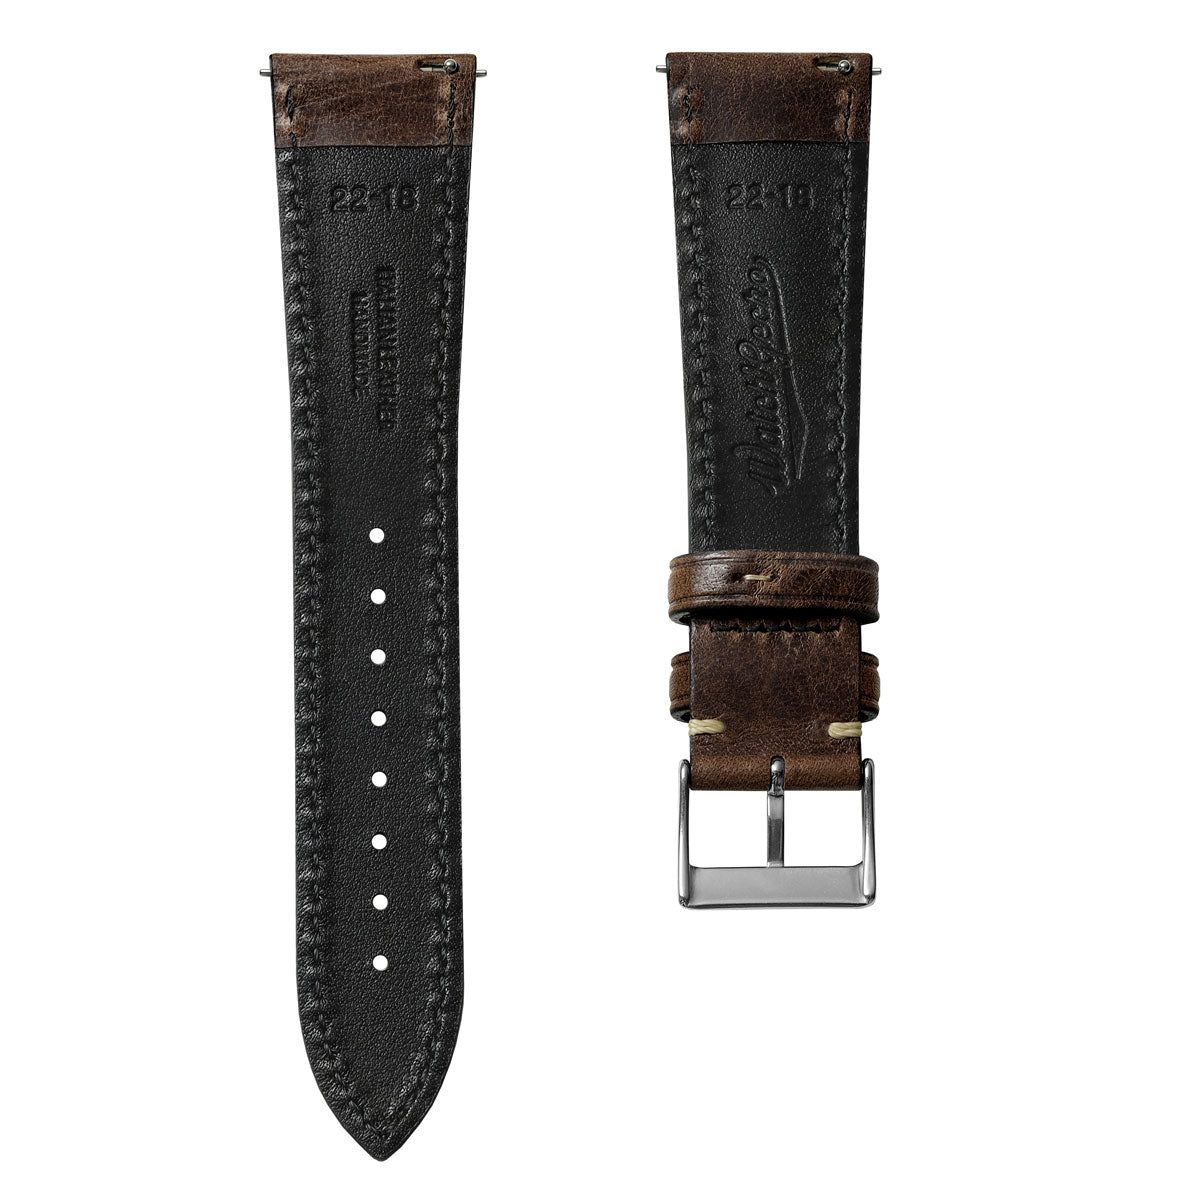 Classic Highley Genuine Leather Watch Strap - Chocolate Brown